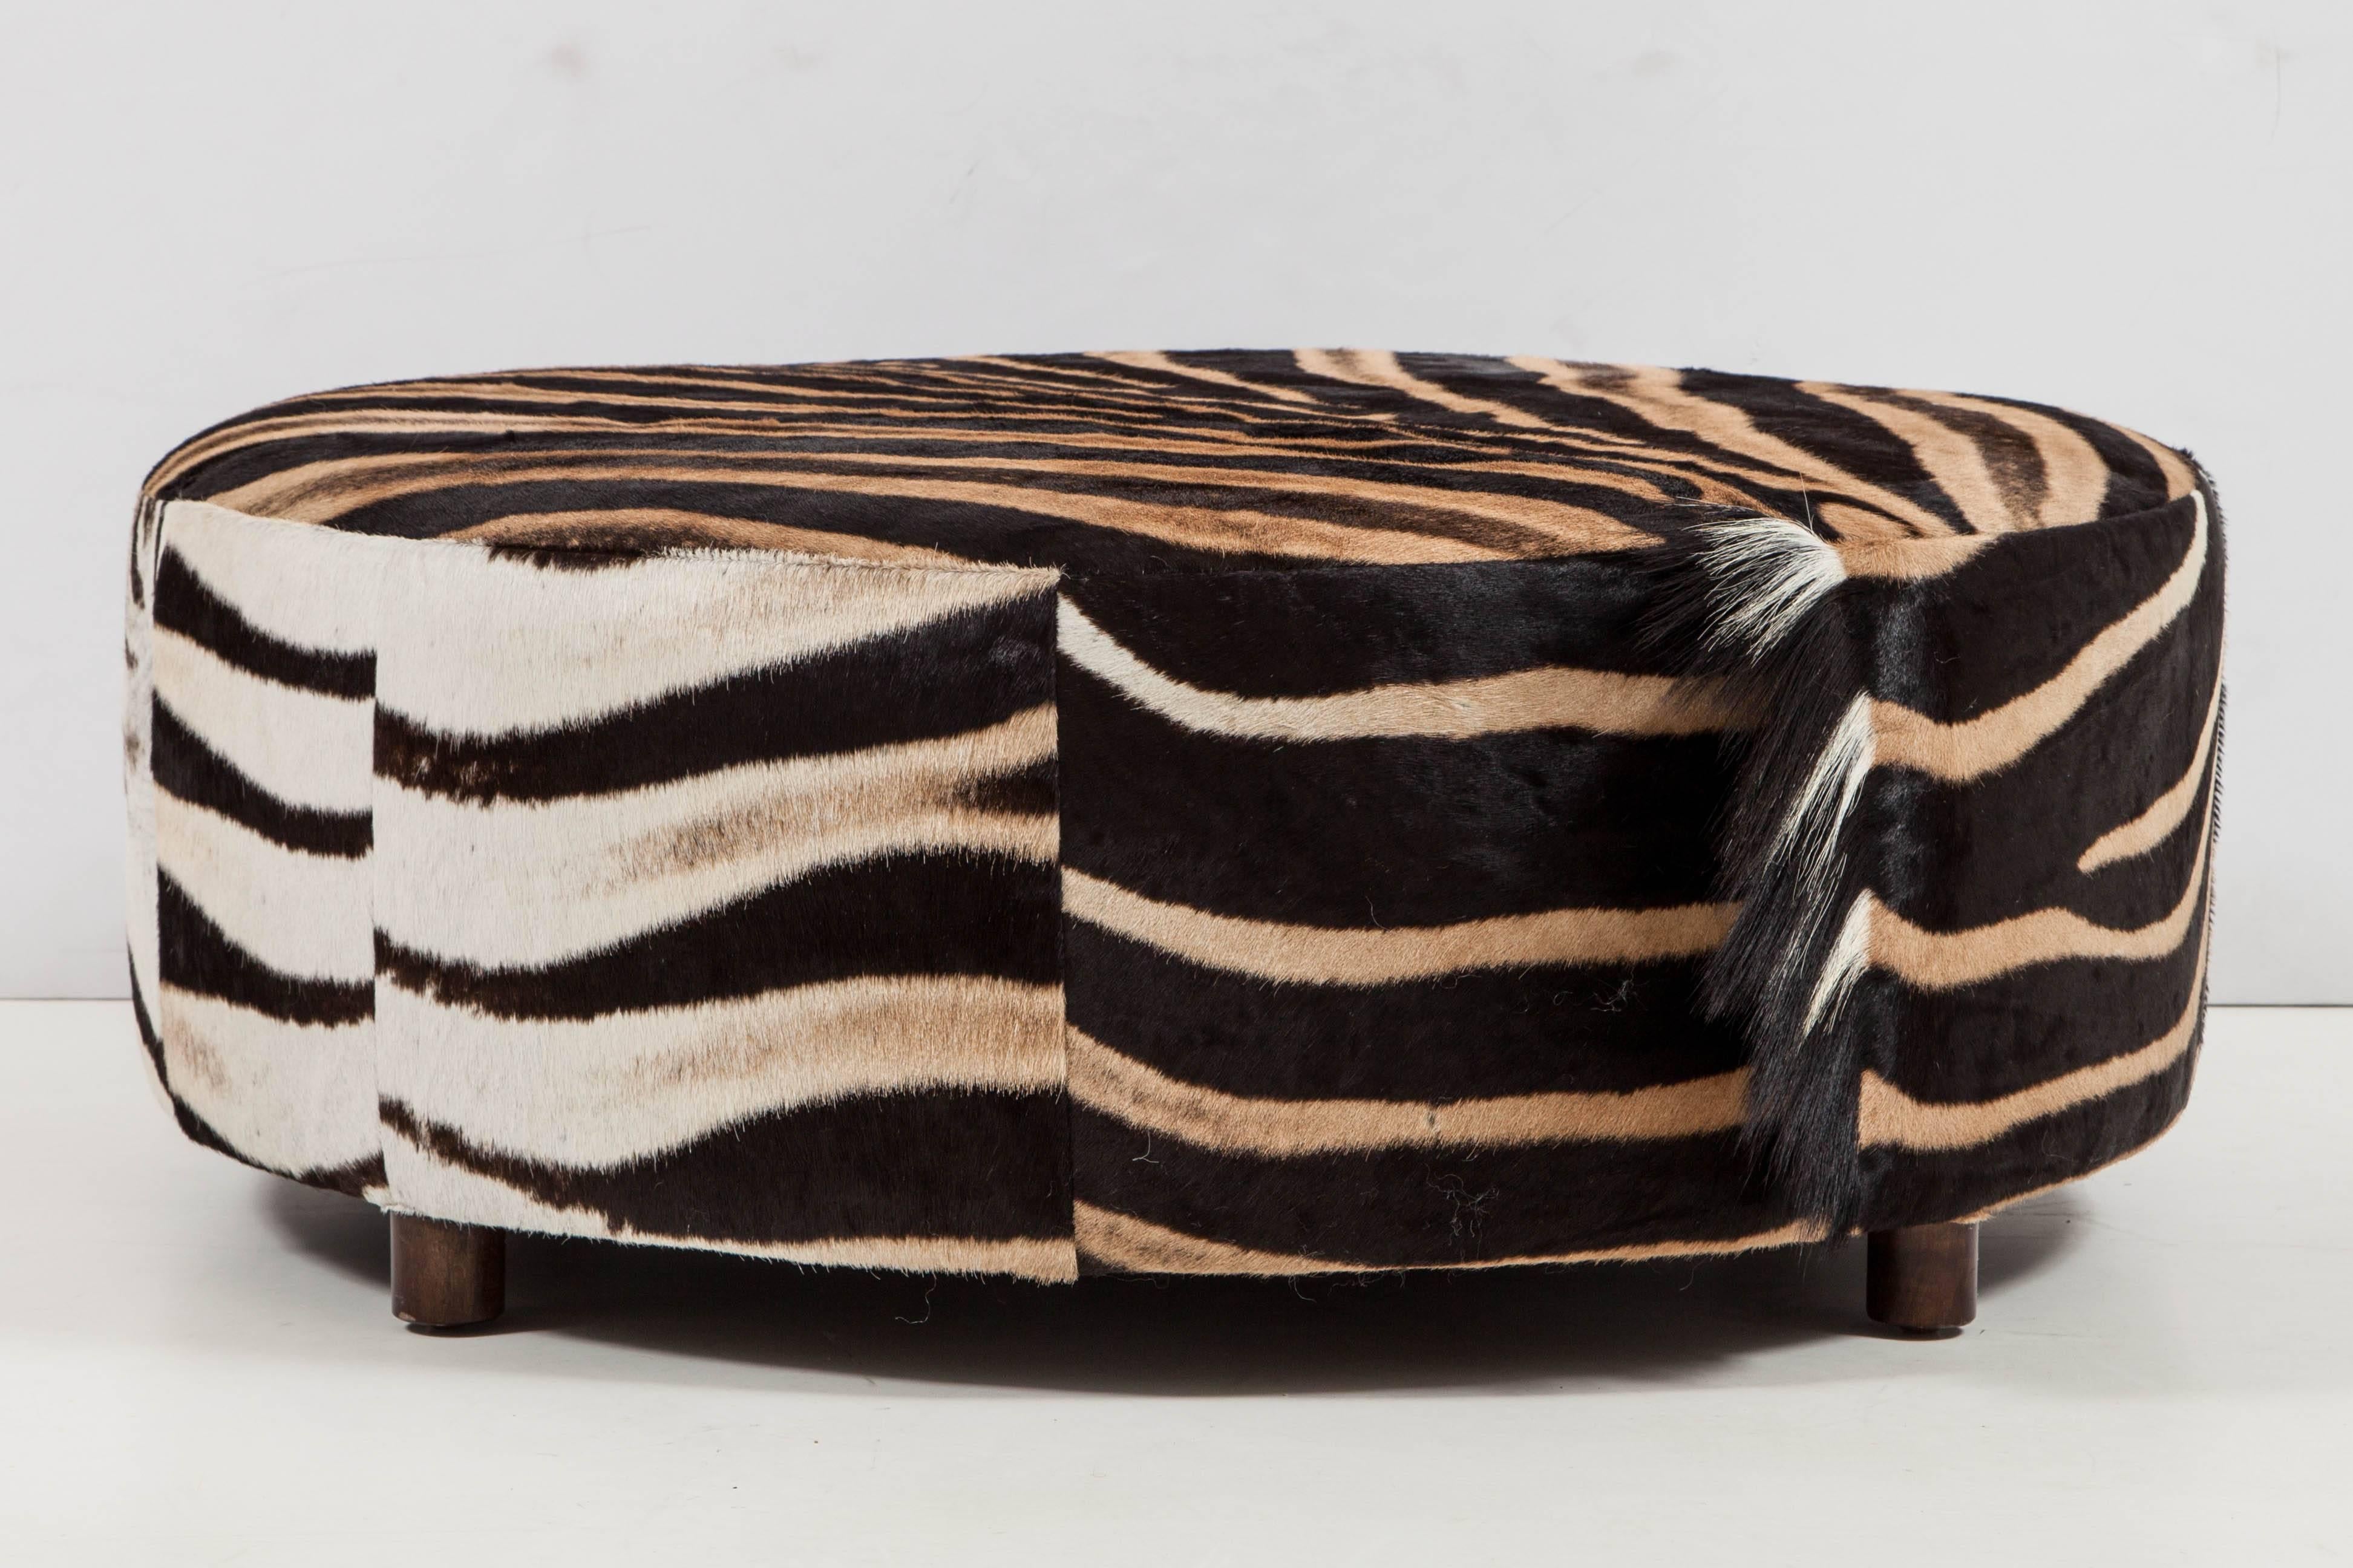 Decorative round zebra ottoman. Wood legs. Measures: Diameter is 36 inches and height is 12 inches. This ottoman is sold but we have one more. Let us know and we will email pictures of the new zebra ottoman.